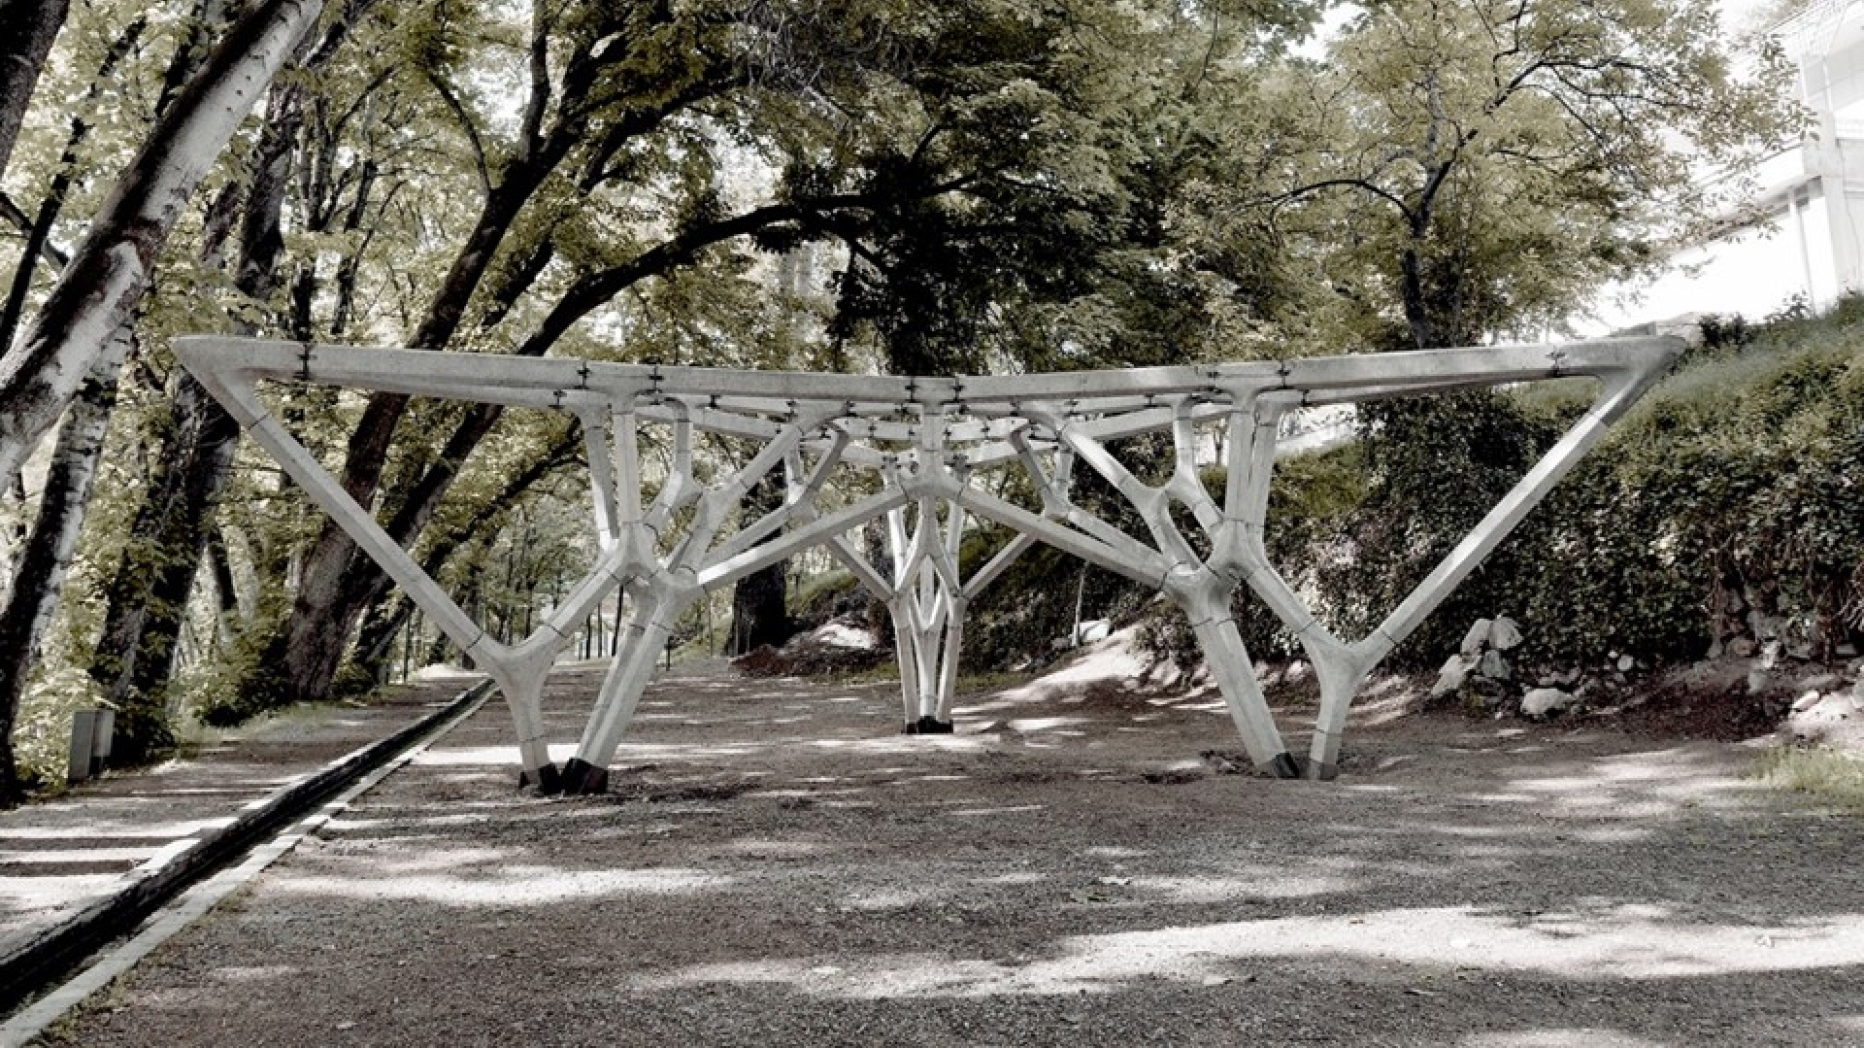 Large frame structure in a park area.